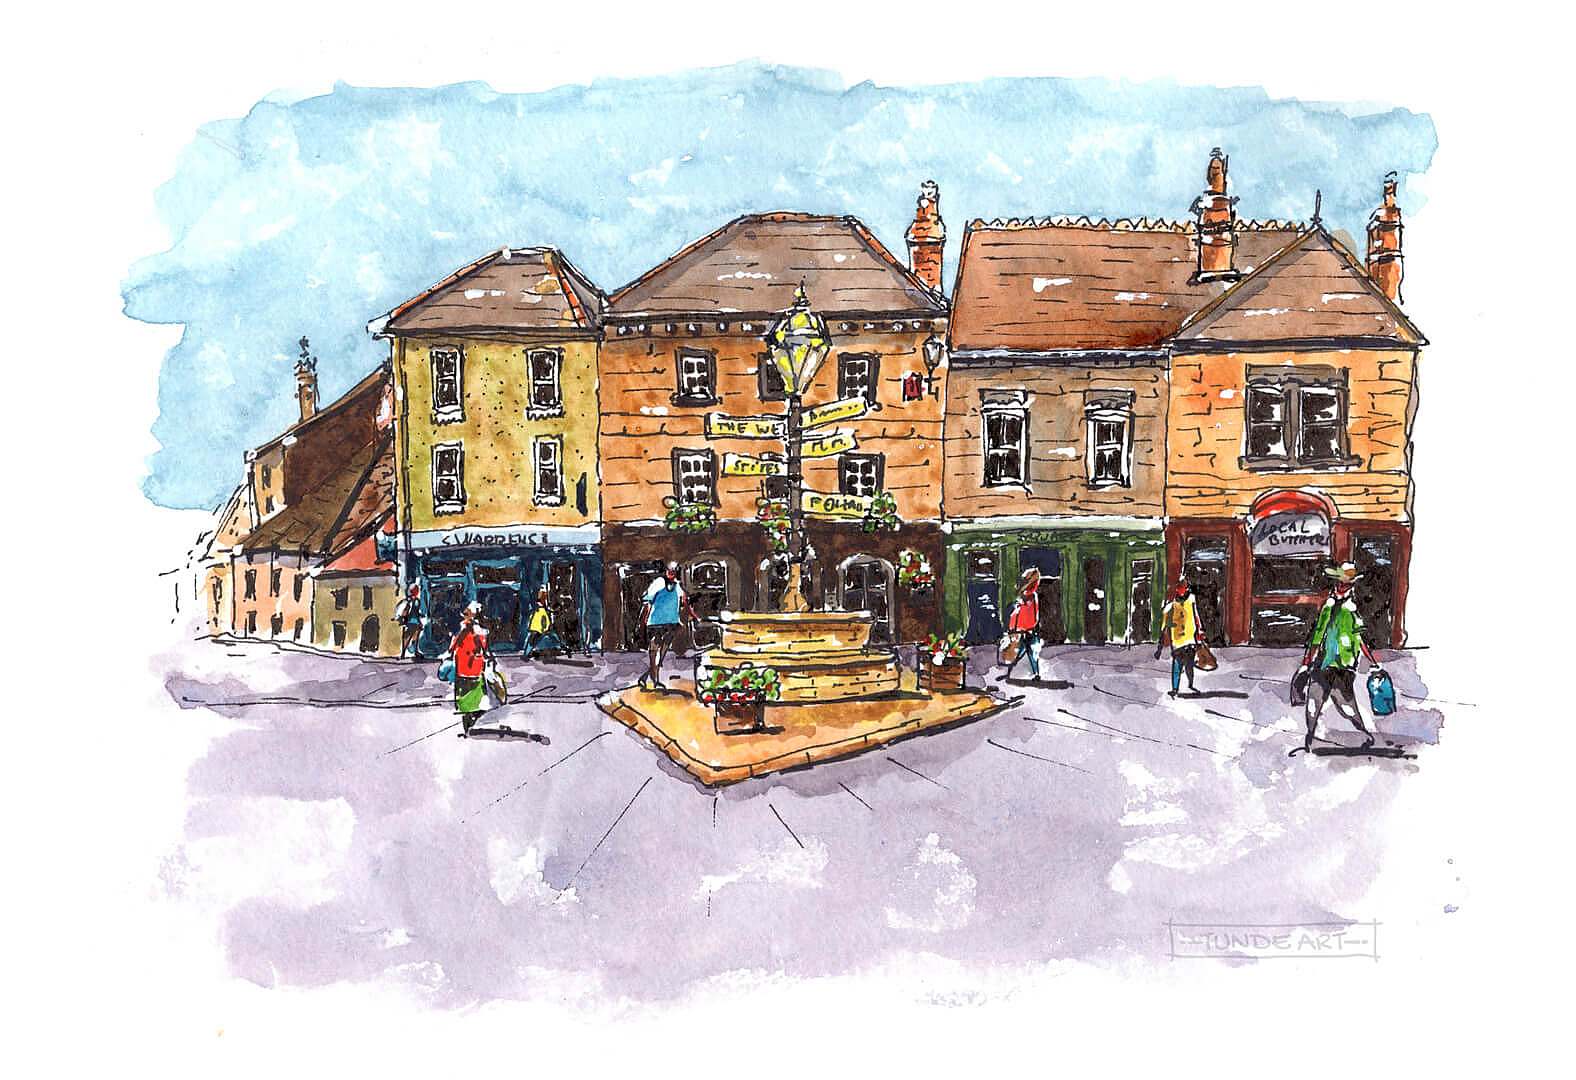 Town Square in St Just, Cornwall - Sketch by Tunde Szentes